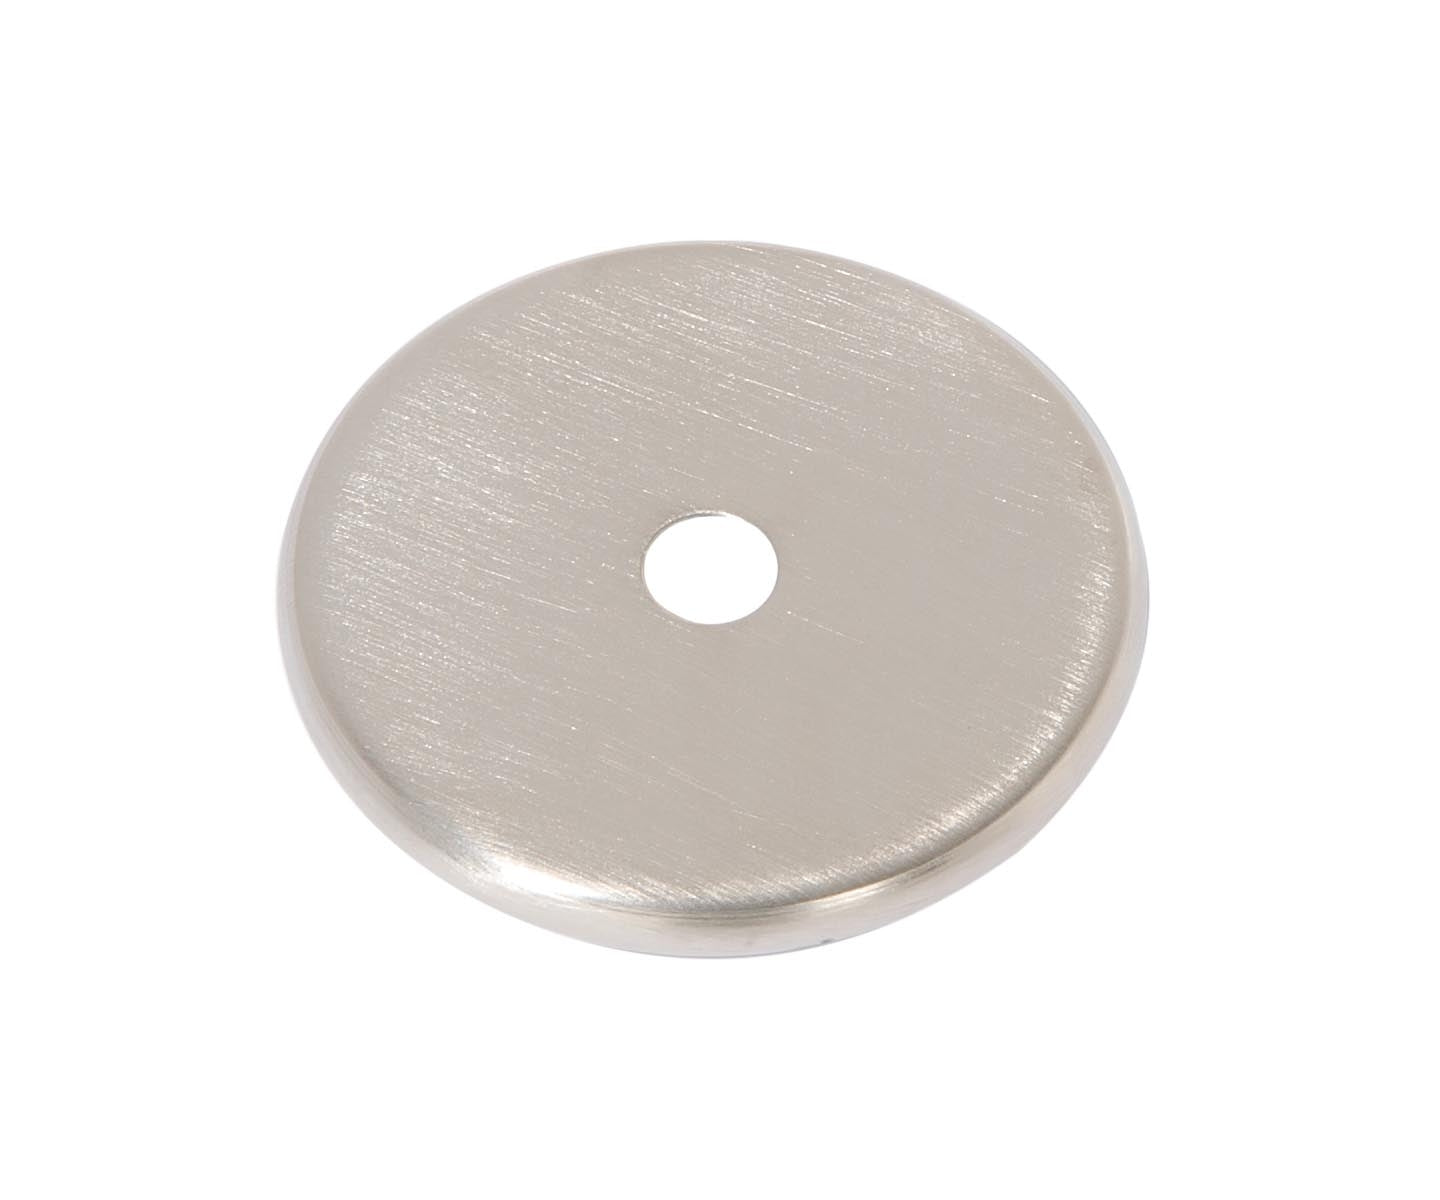 Satin Nickel Rolled Edge Brass Check Plate, Choice of Dia. 